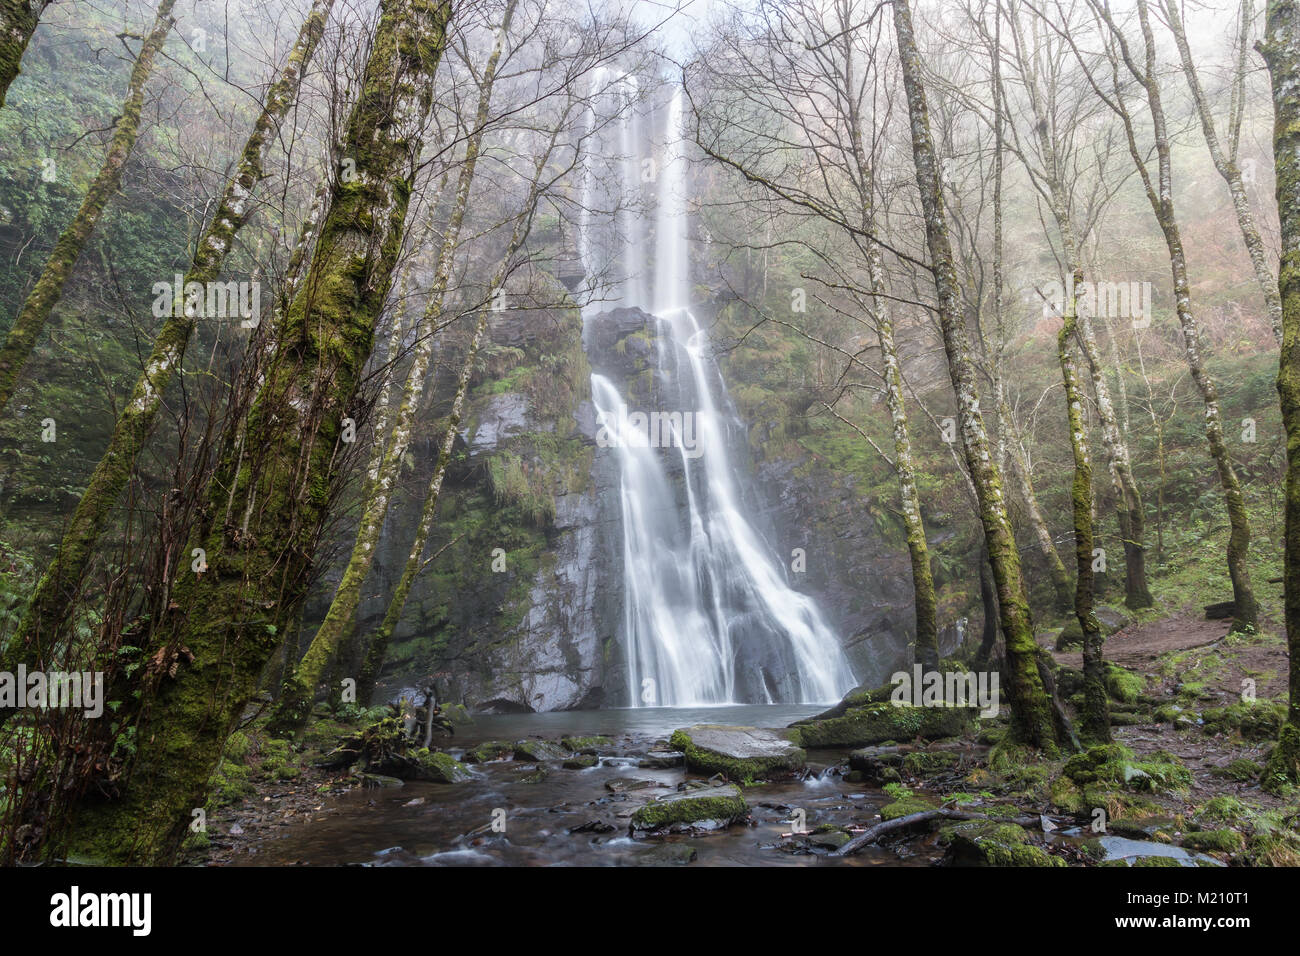 time of waterfalls and rivers full of water in the autumn of a small town in Galicia, Fonsagrada, worth seeing for its beauty and grandeur Stock Photo